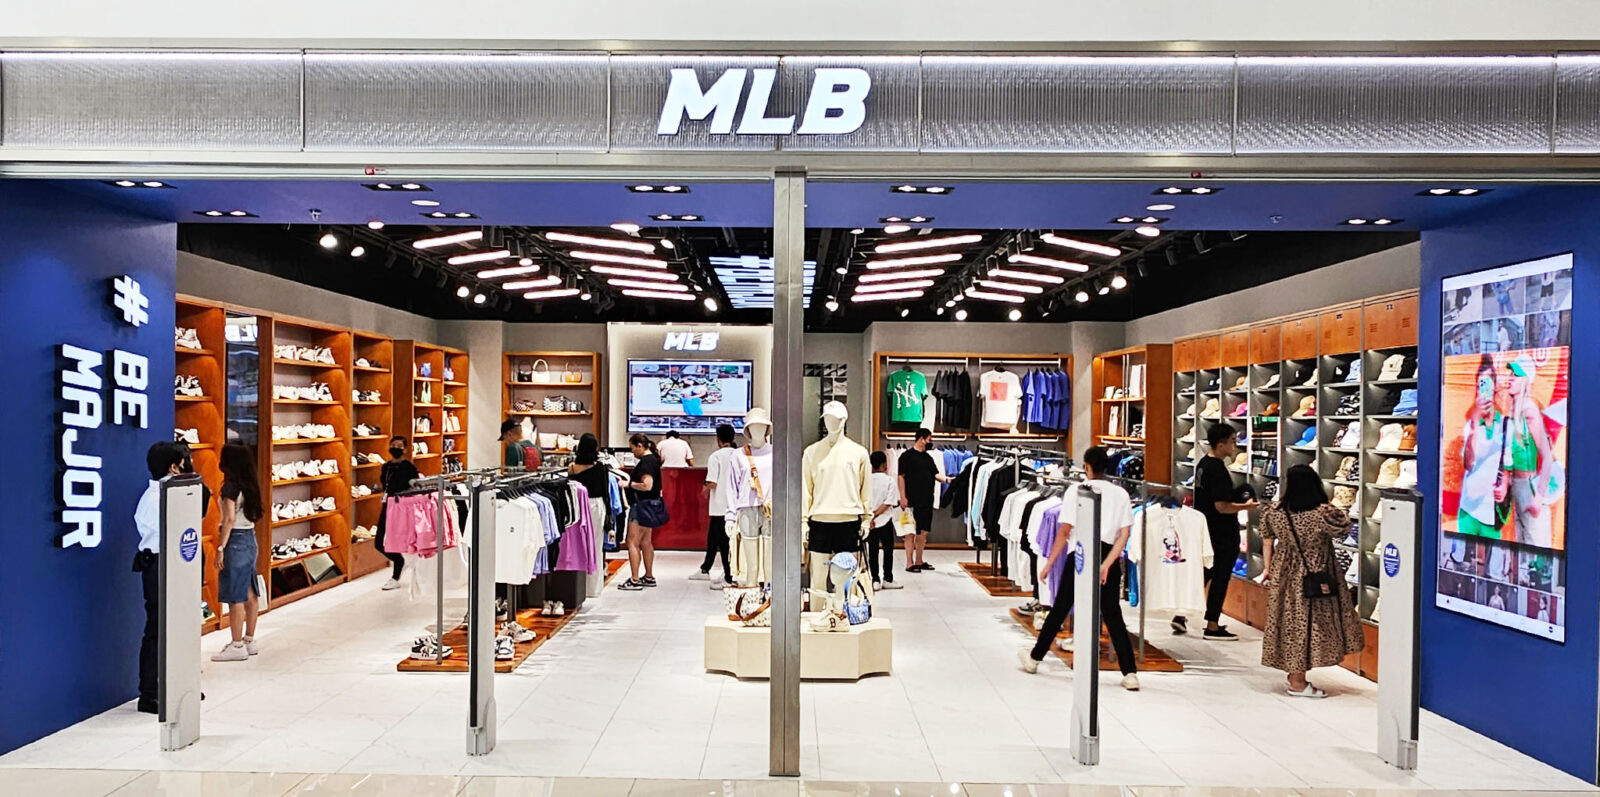 MLB Philippines opened its second store in the country at SM Aura